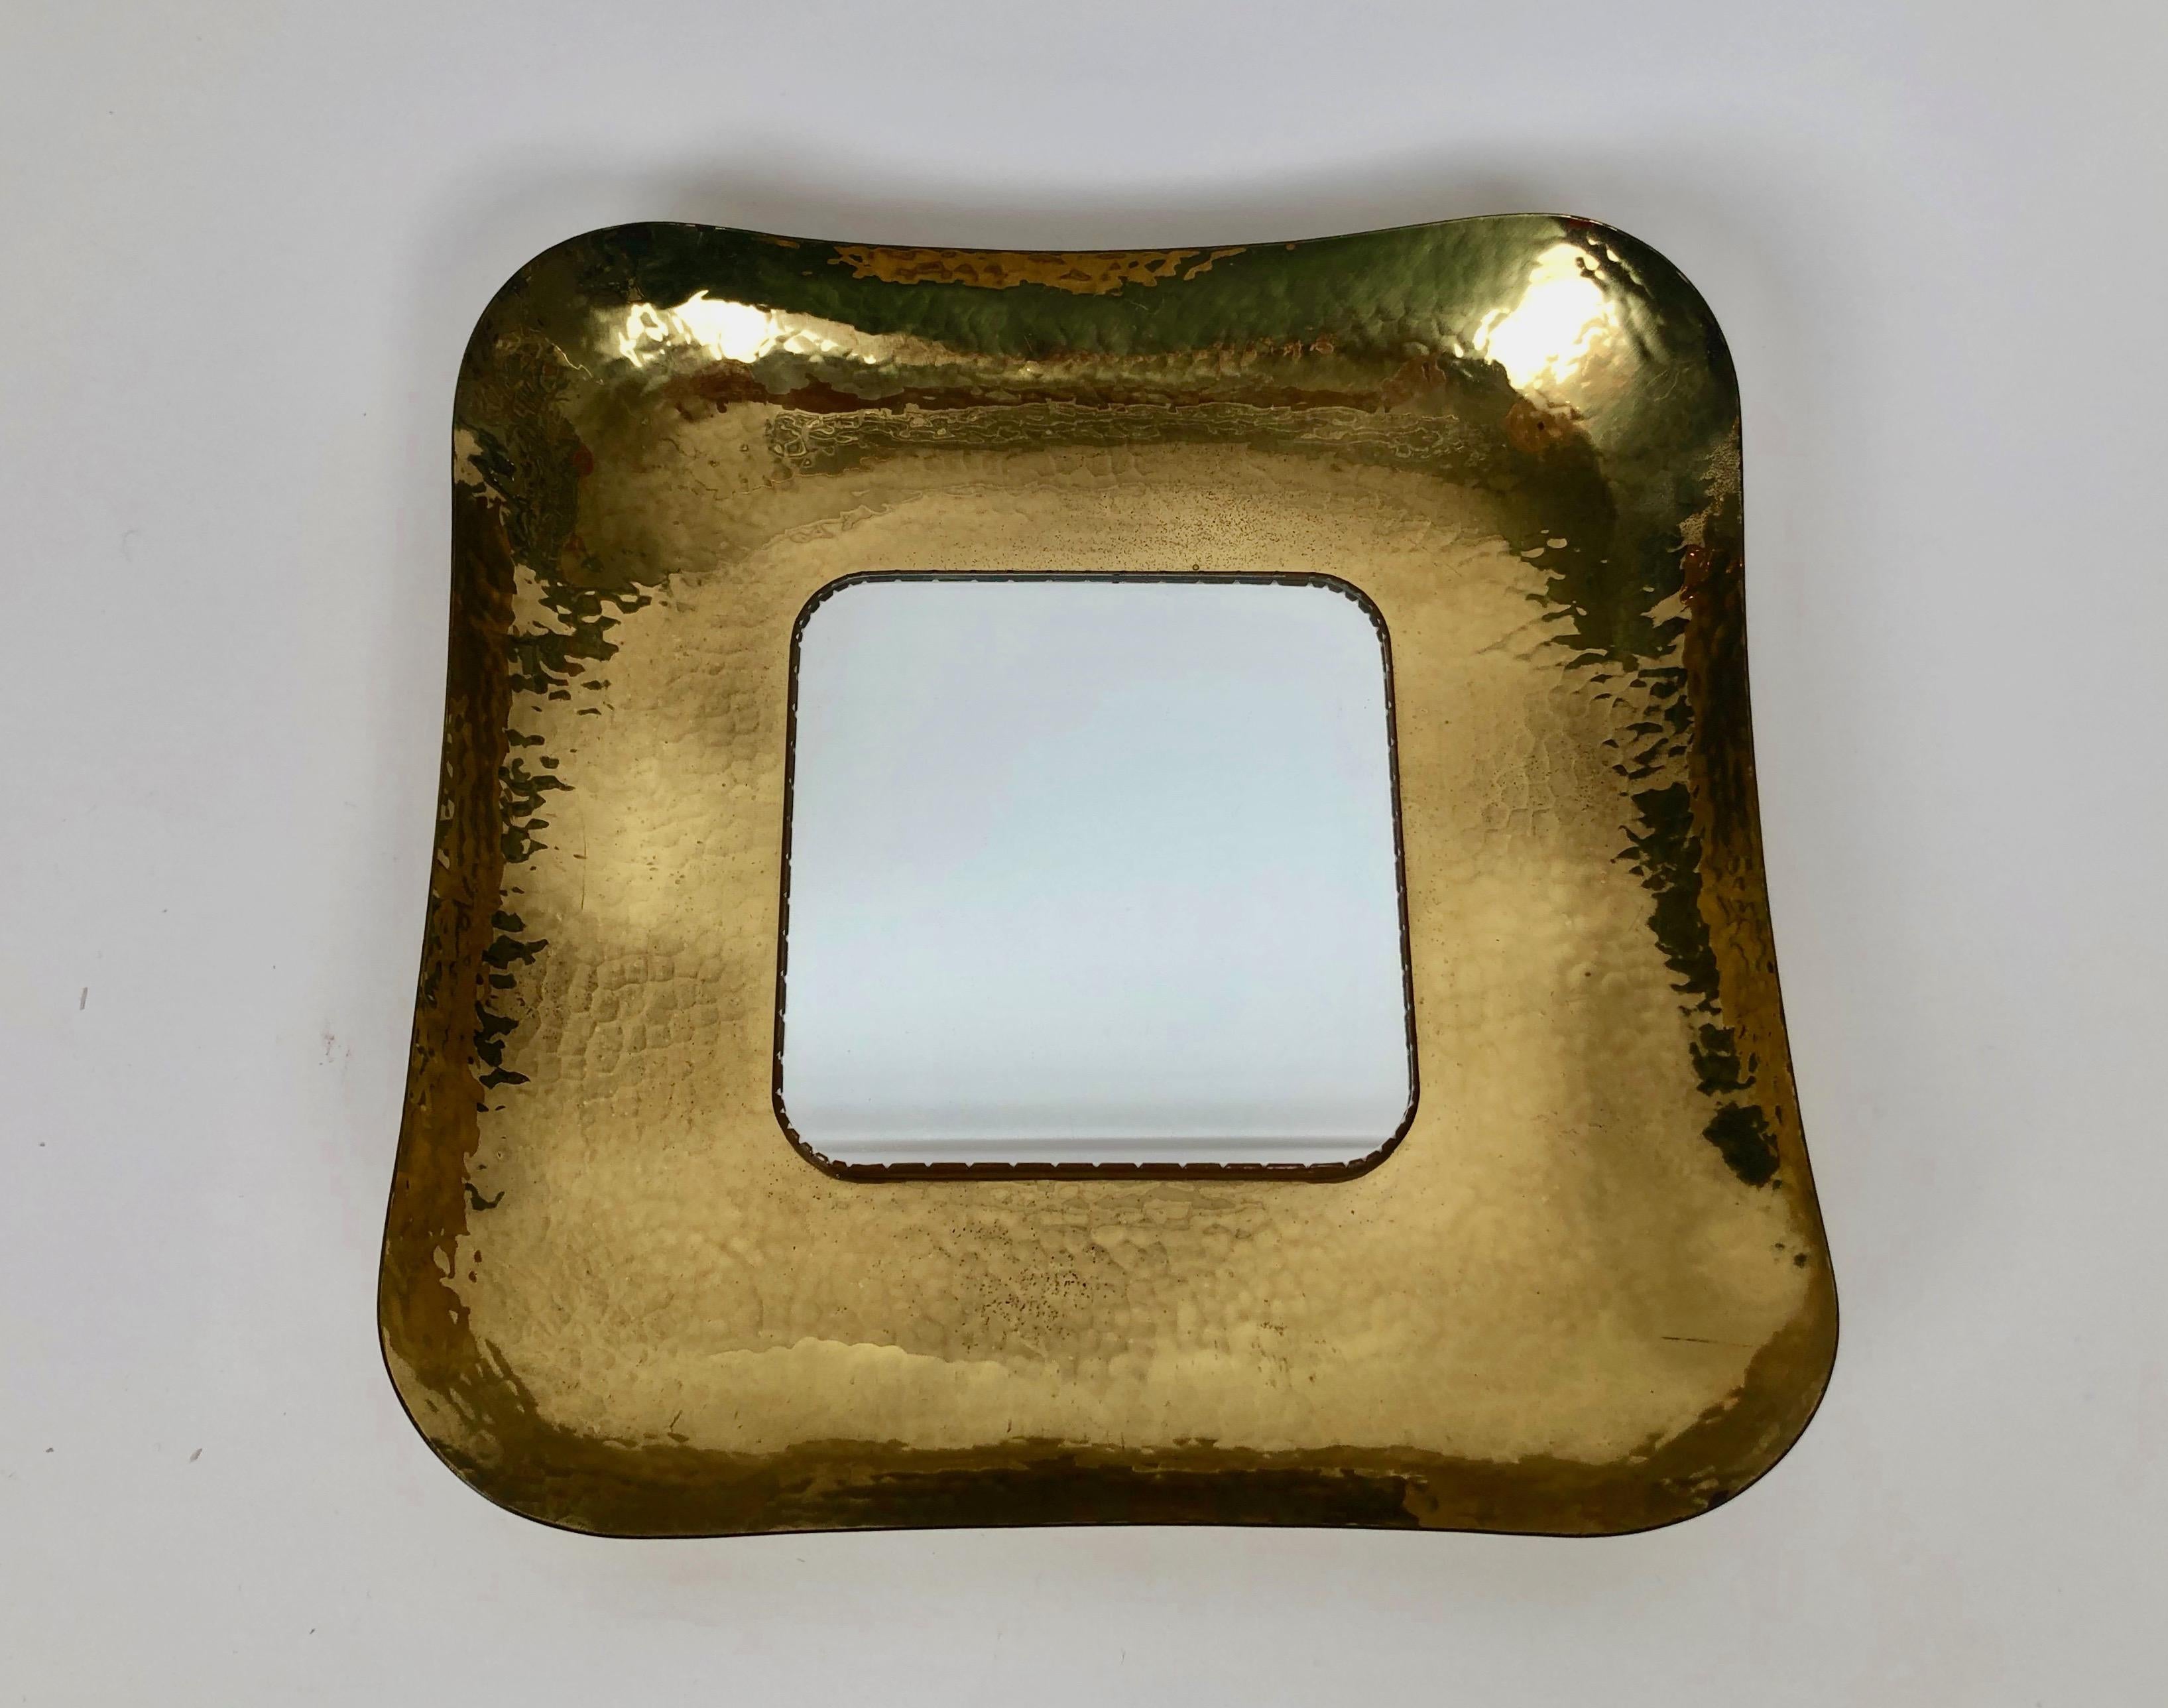 An exquisite hand hammered mid-century brass mirror made by Austrian craftsmen,
in the 1950's. The excellent hand work that went in to forming the brass is typical 
of high end craftsmanship that we expect from Austrian artisans . The mirror is held